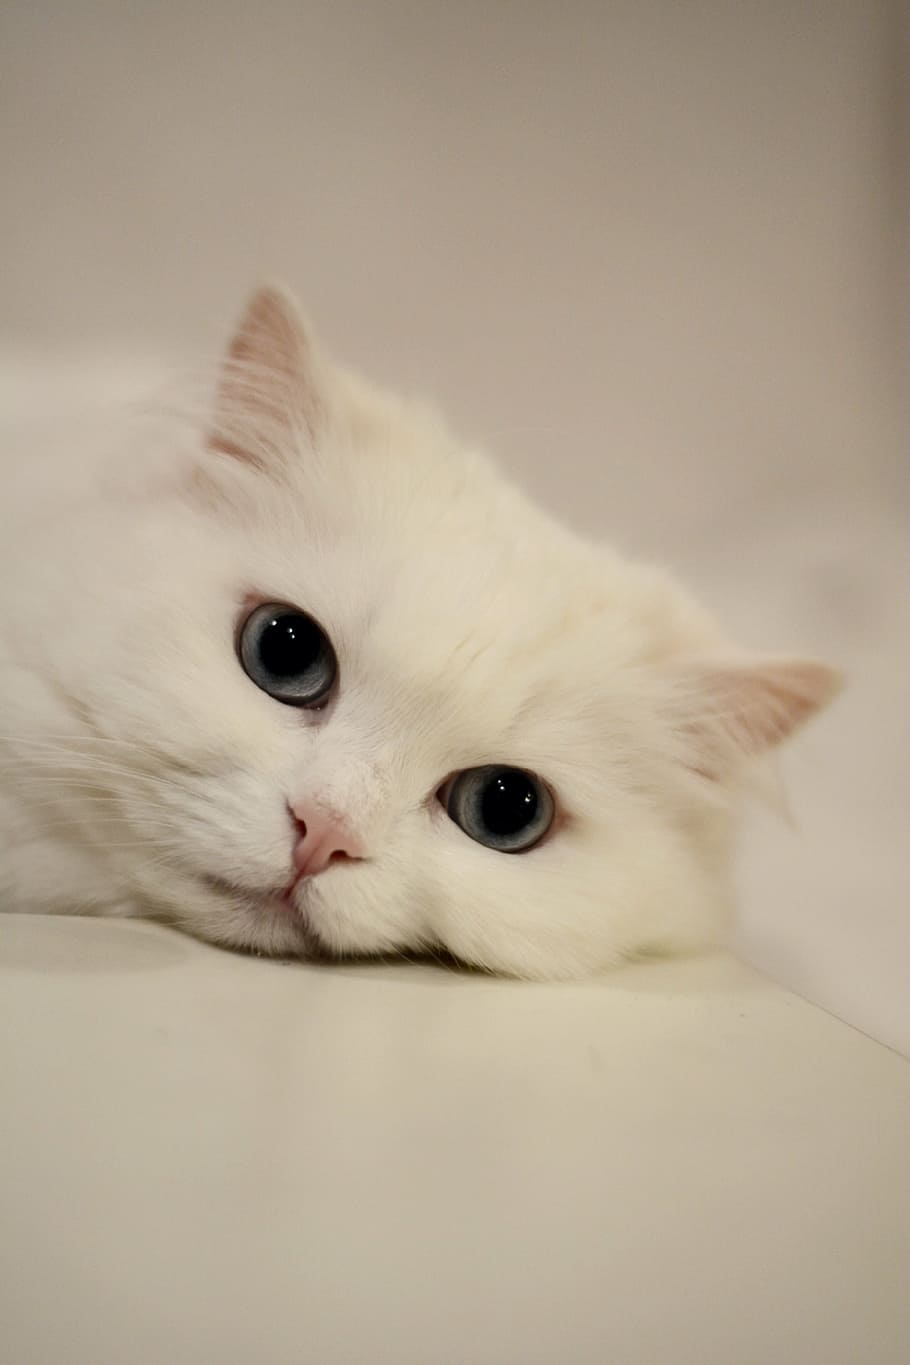 white, cat, surface, eyes, cat's eyes, domestic cat, calm cat, pets, one animal, looking at camera